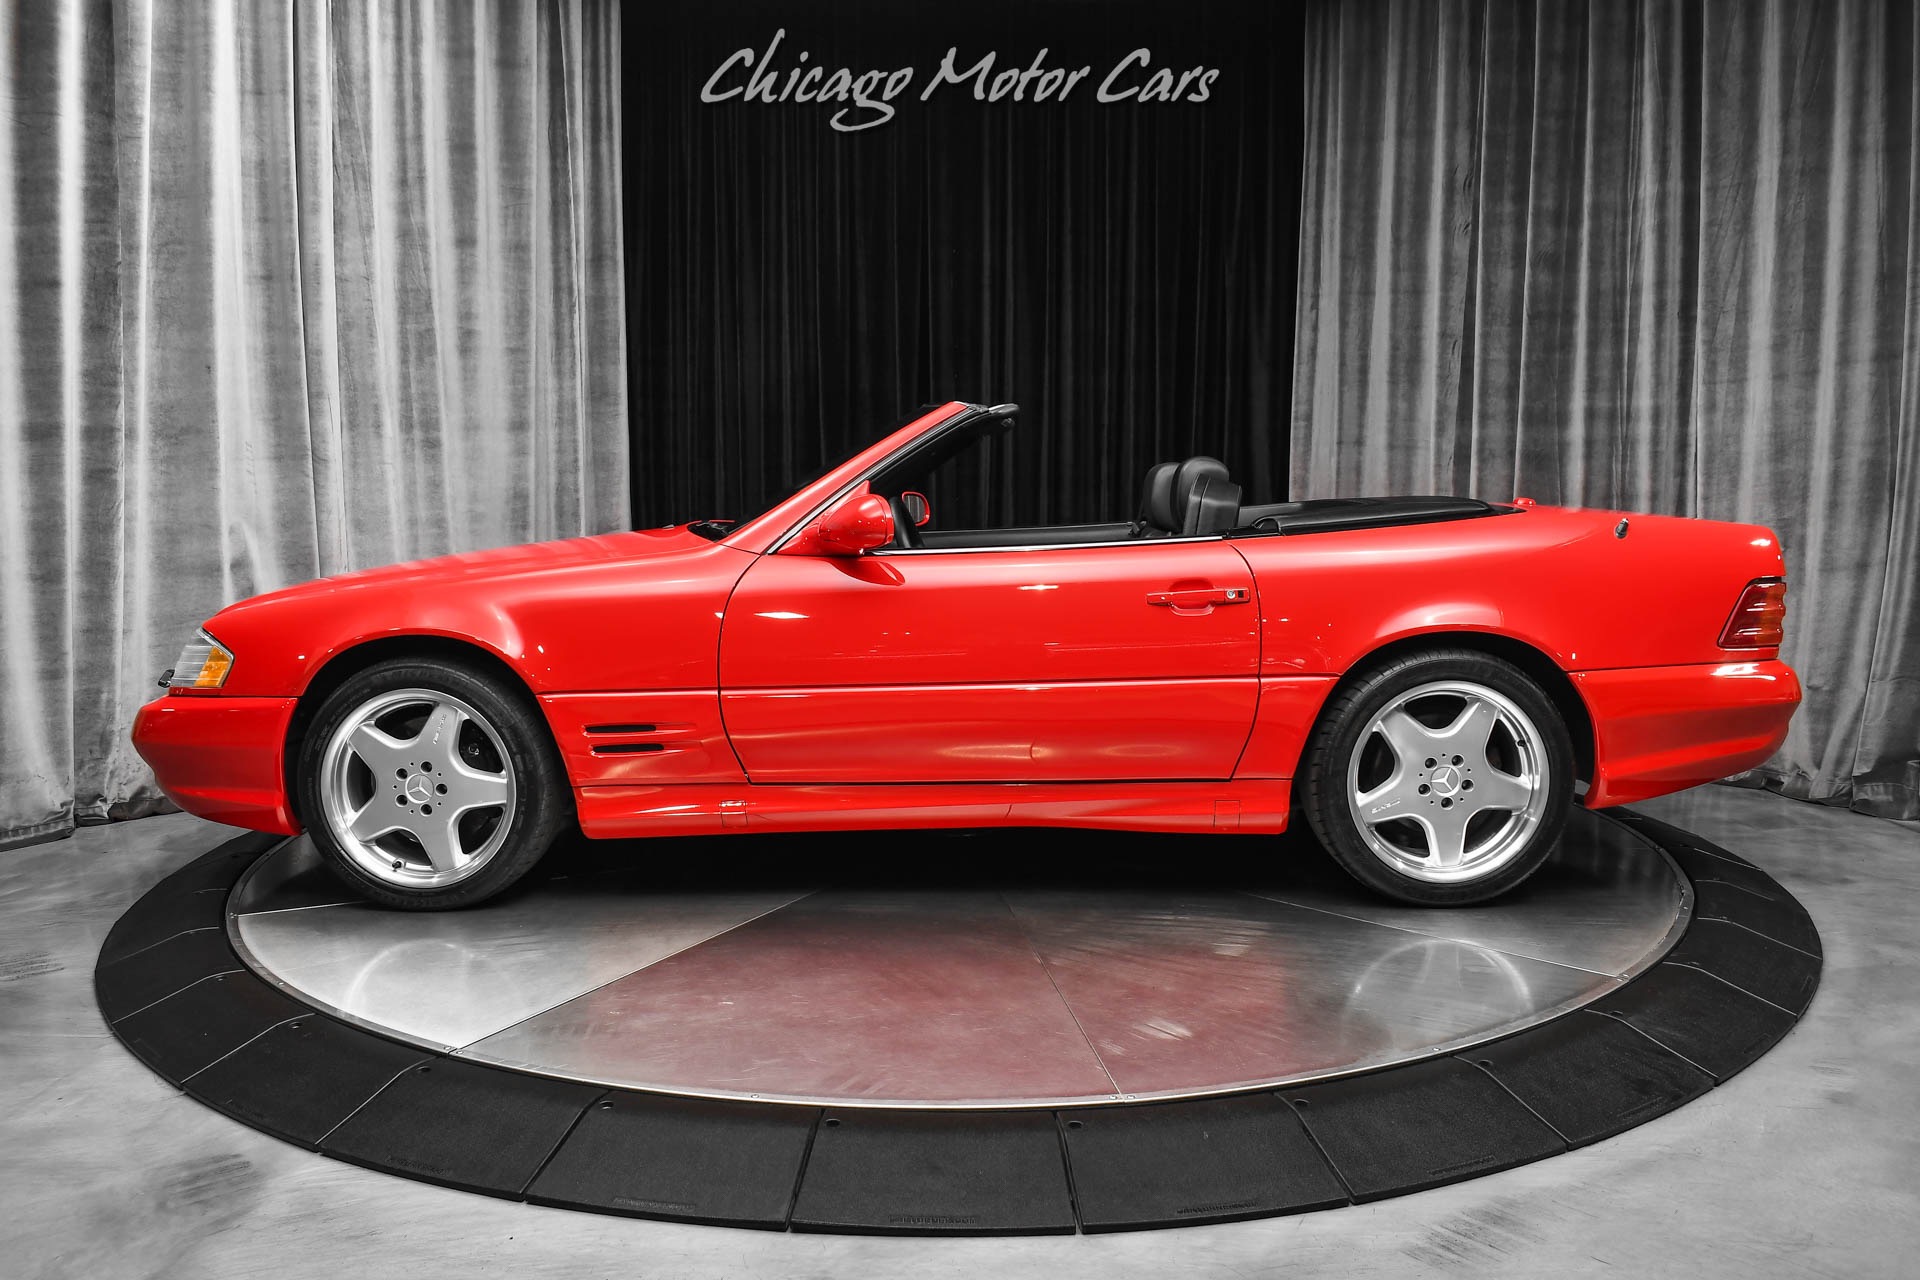 Used-2001-Mercedes-Benz-SL500-Convertible-Sport-Package-Only-53k-Miles-Collection-Quality